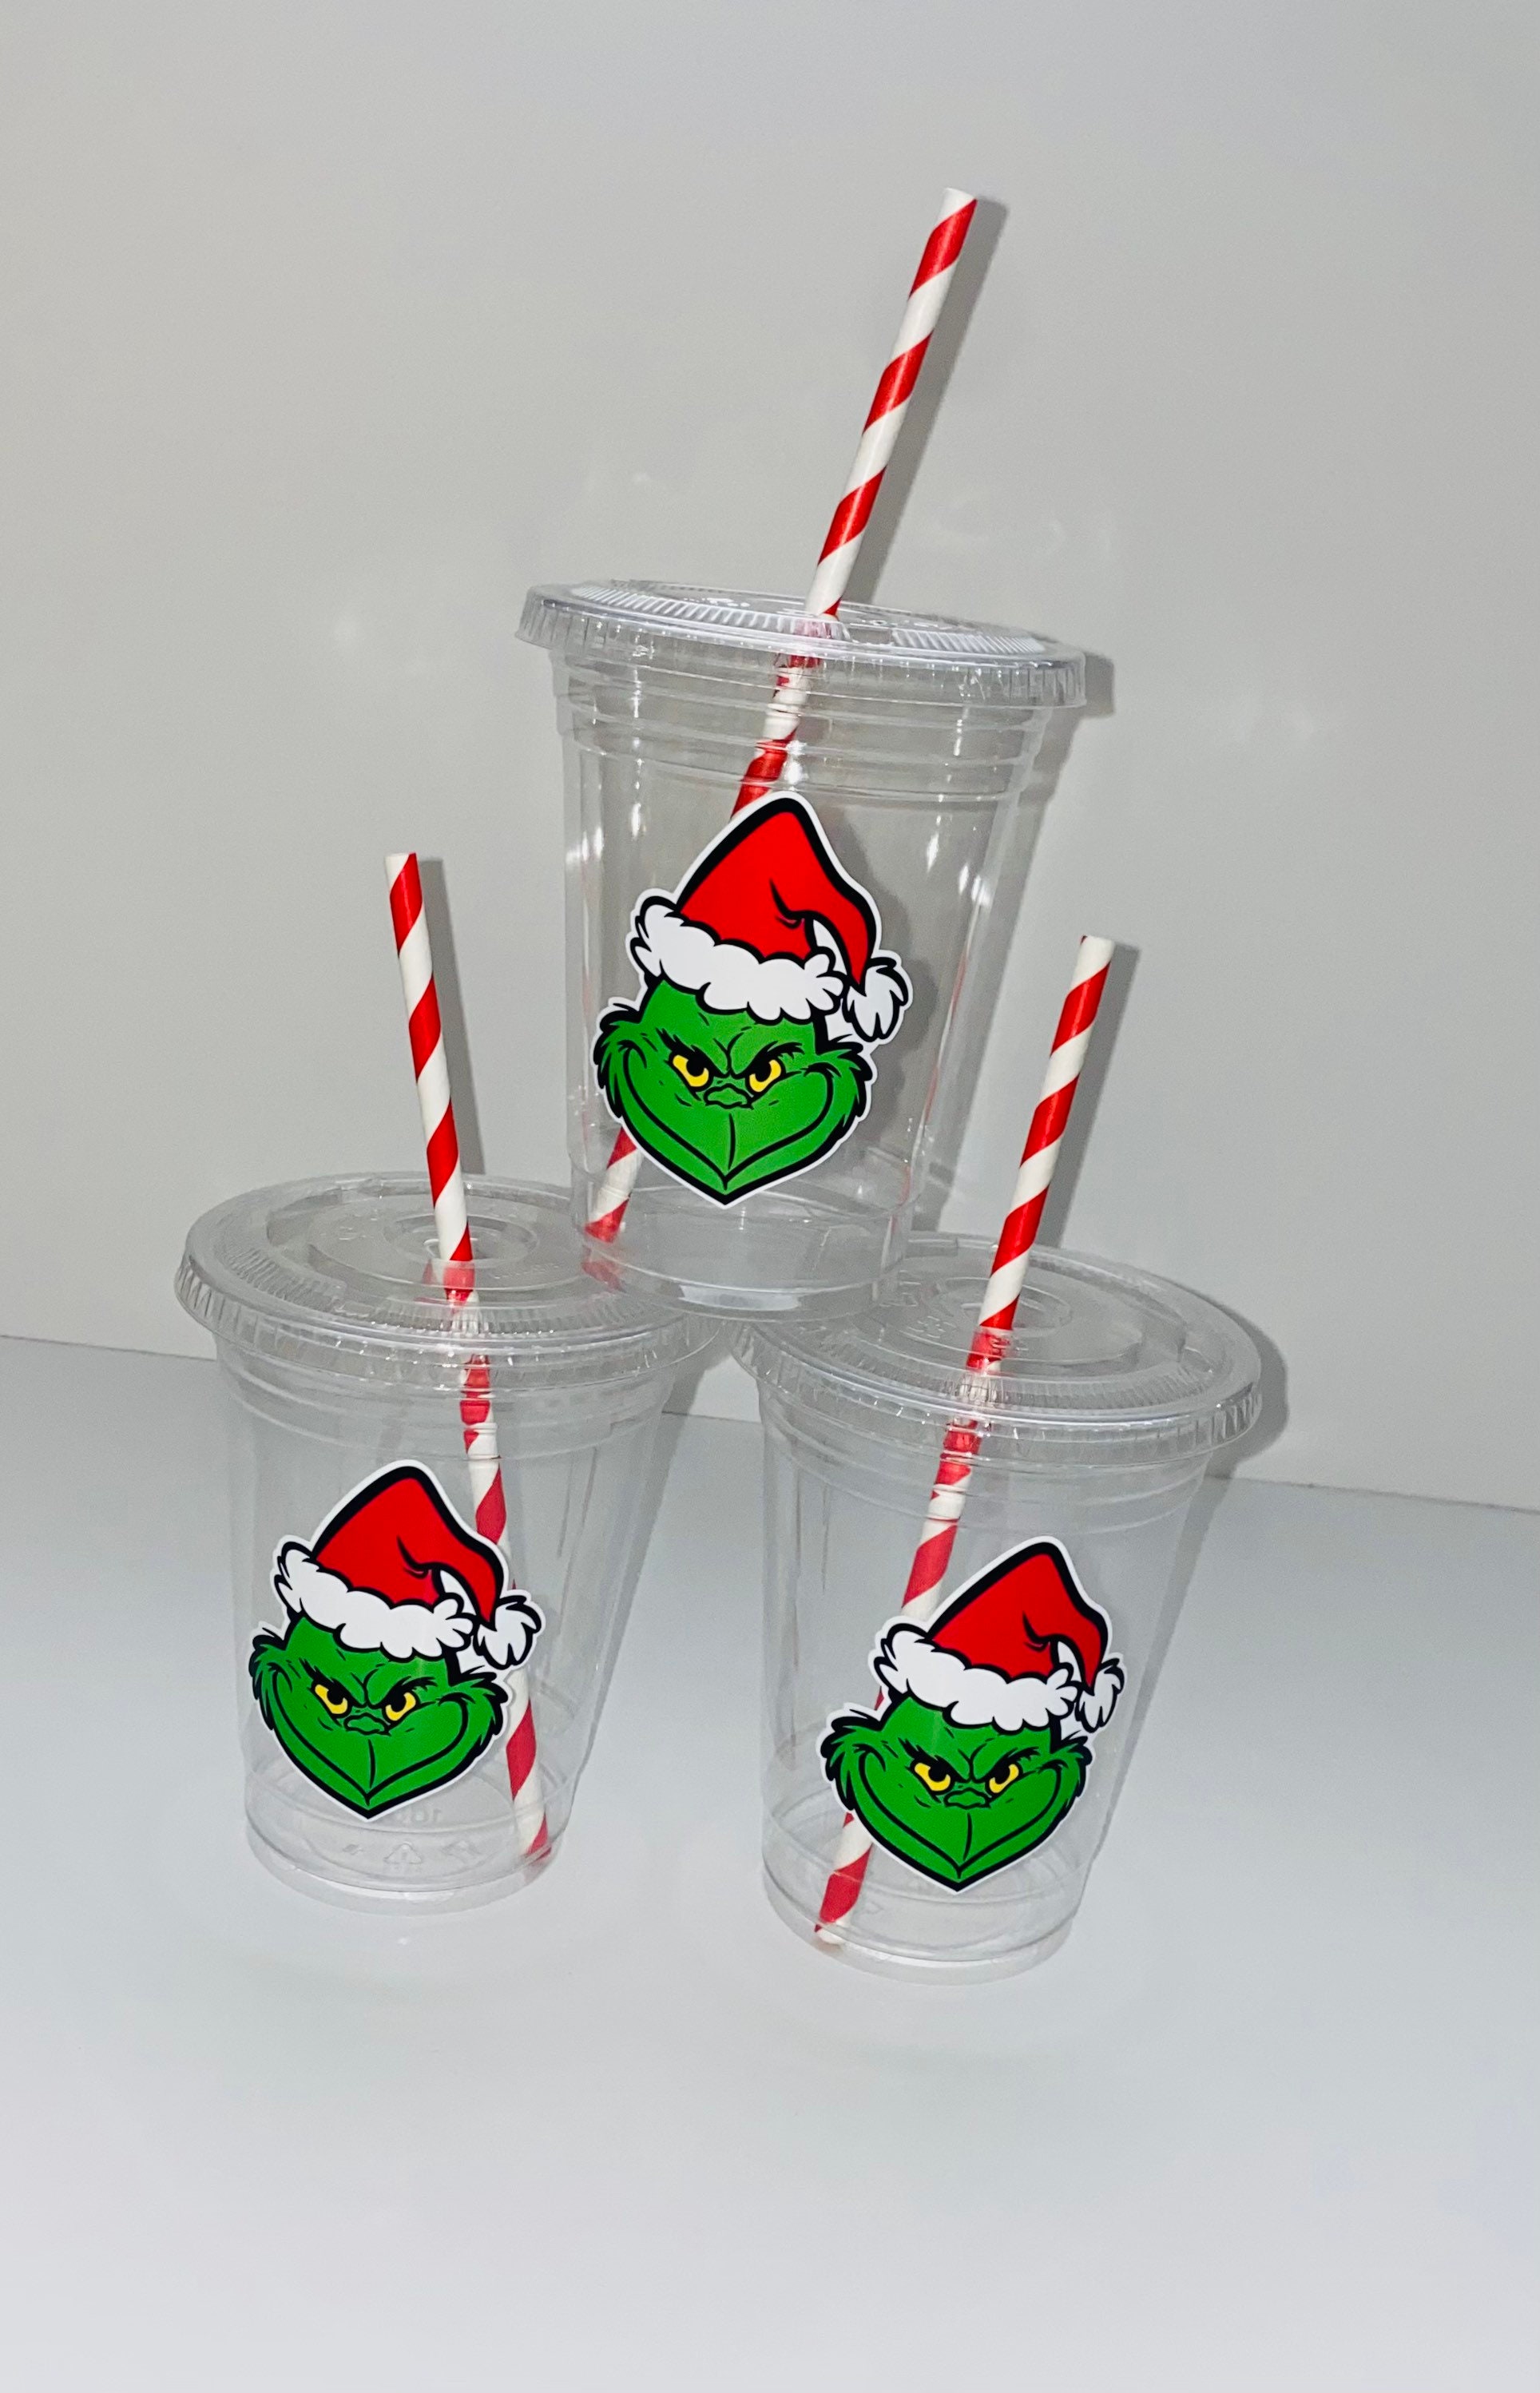  Christmas Plastic Party Cups - Set of 20 Red and Green 16oz  Plastic Holiday Stadium Cups, 4 Festive Drinking Pun Designs, Perfect for  Christmas Party Supplies1 : Home & Kitchen